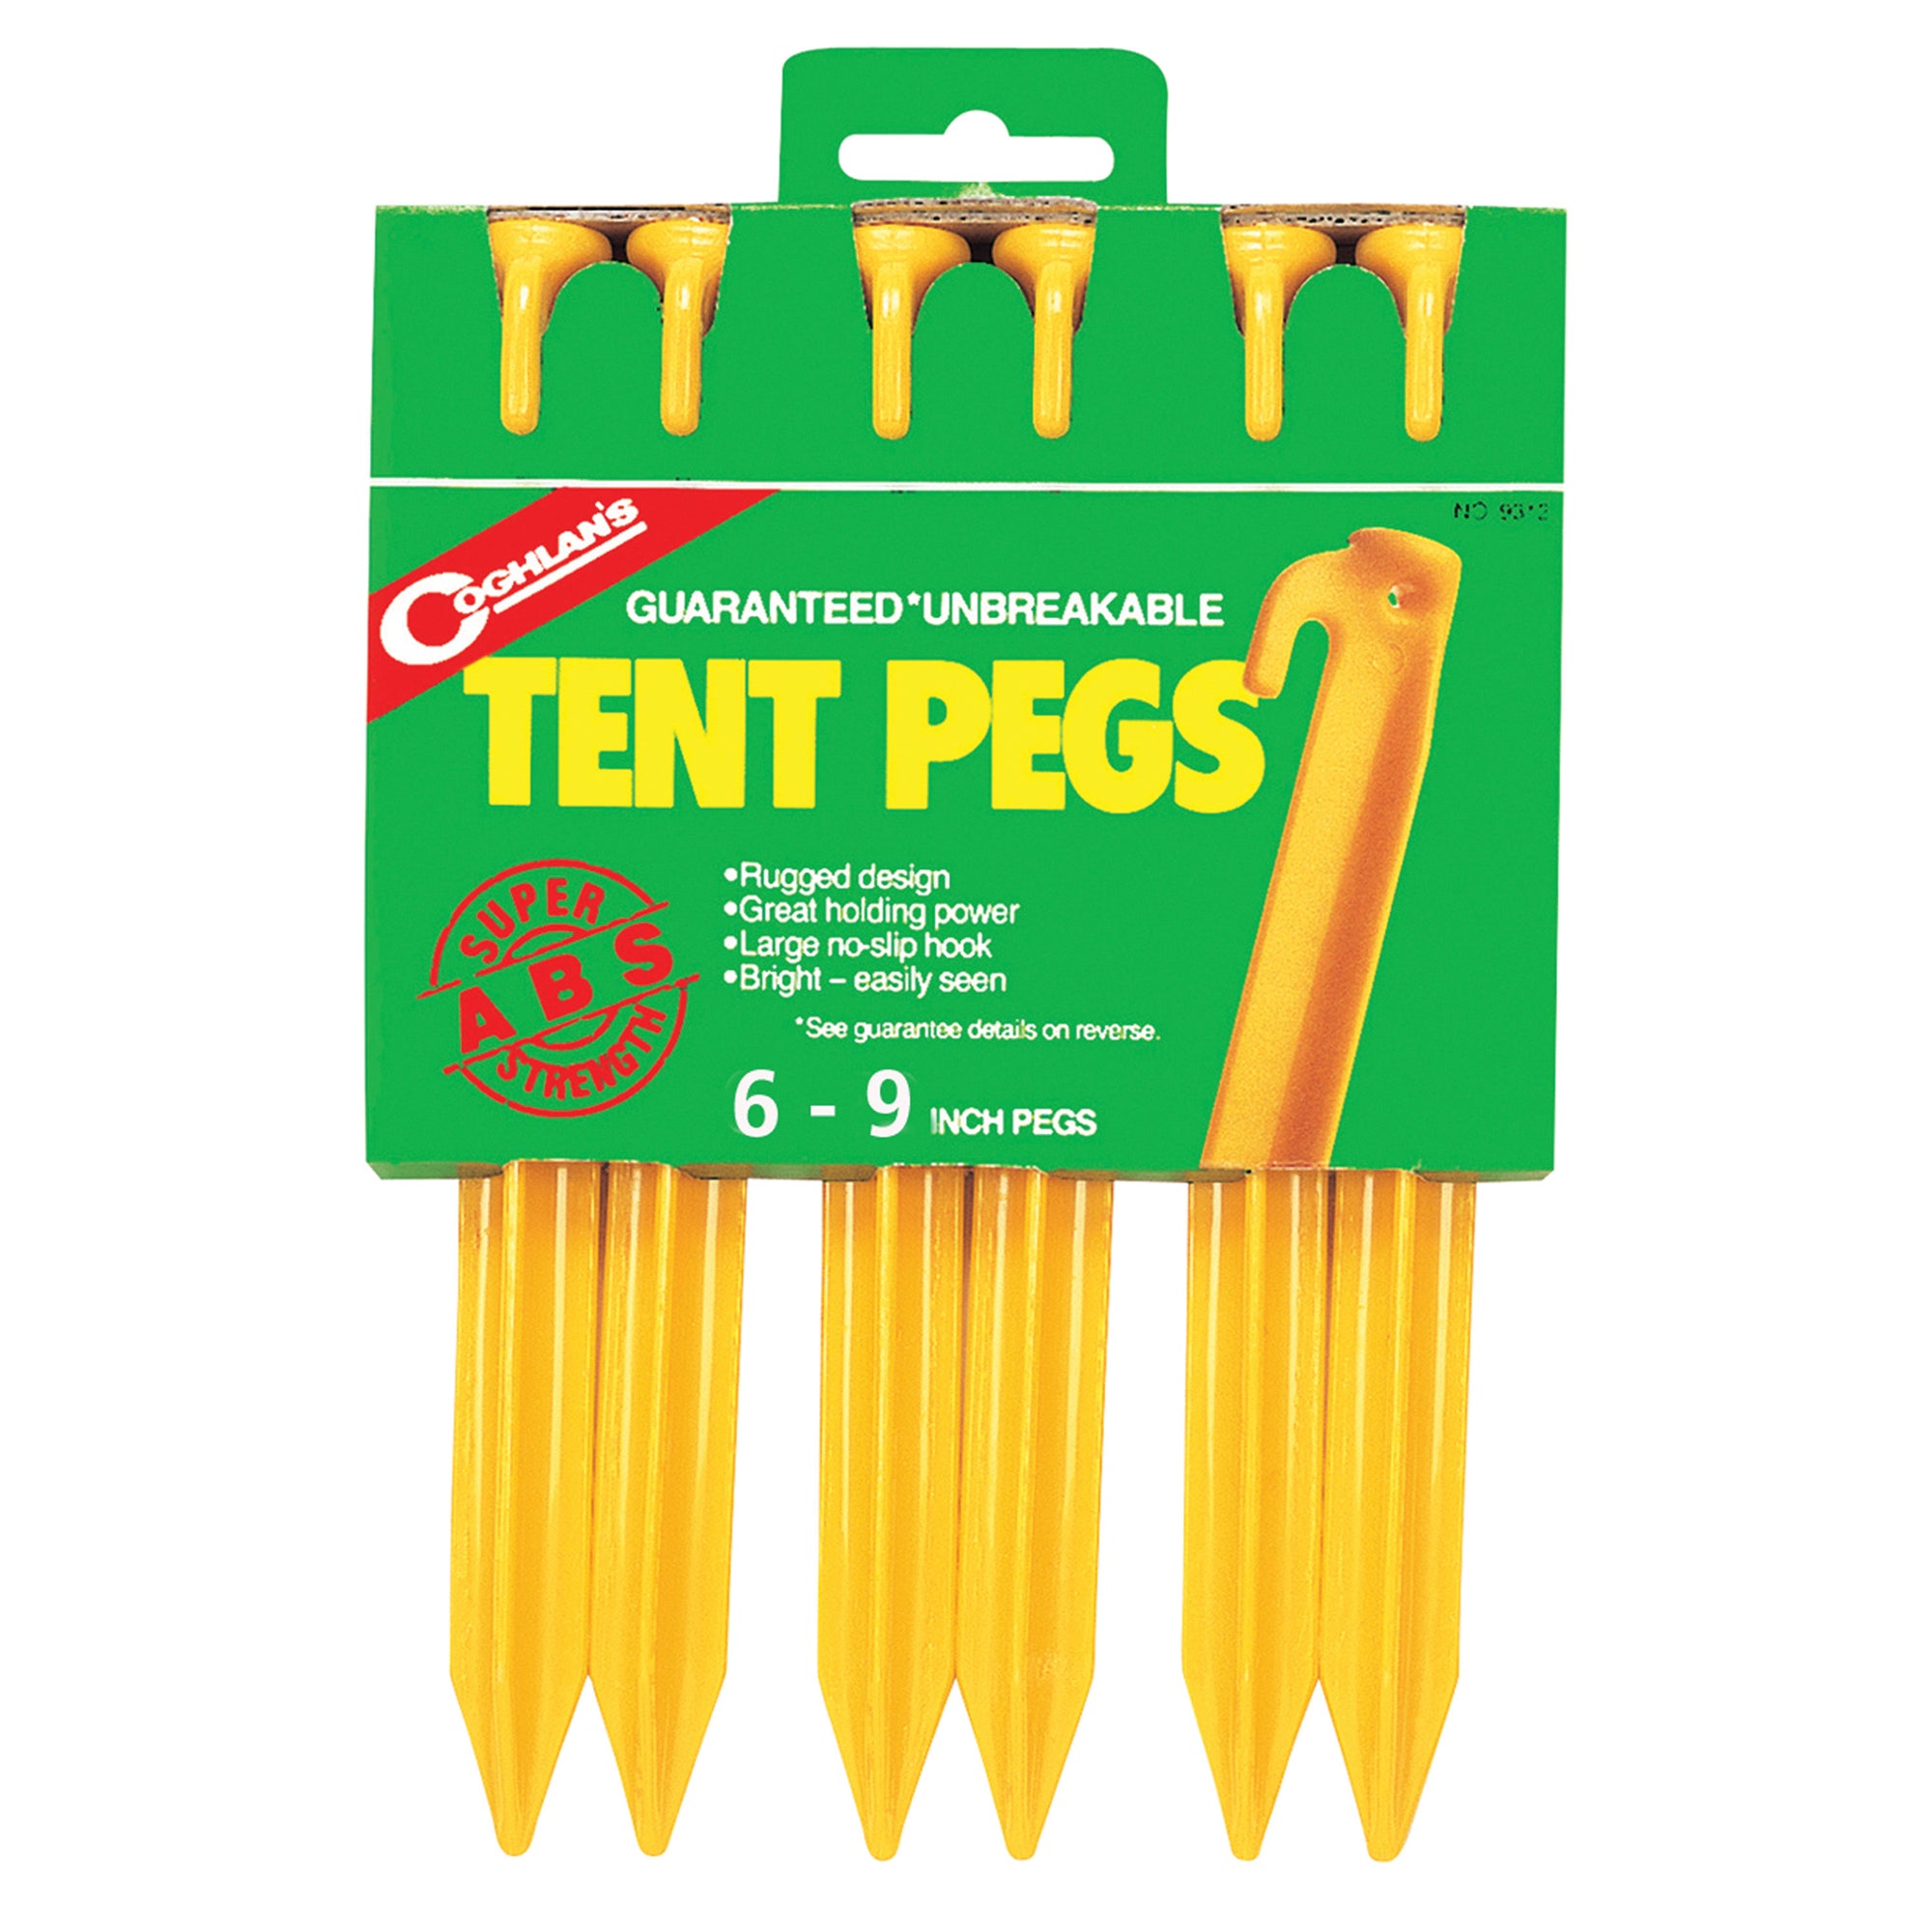 Coghlan's 9309 ABS 9" Tent Pegs - Pack of 6